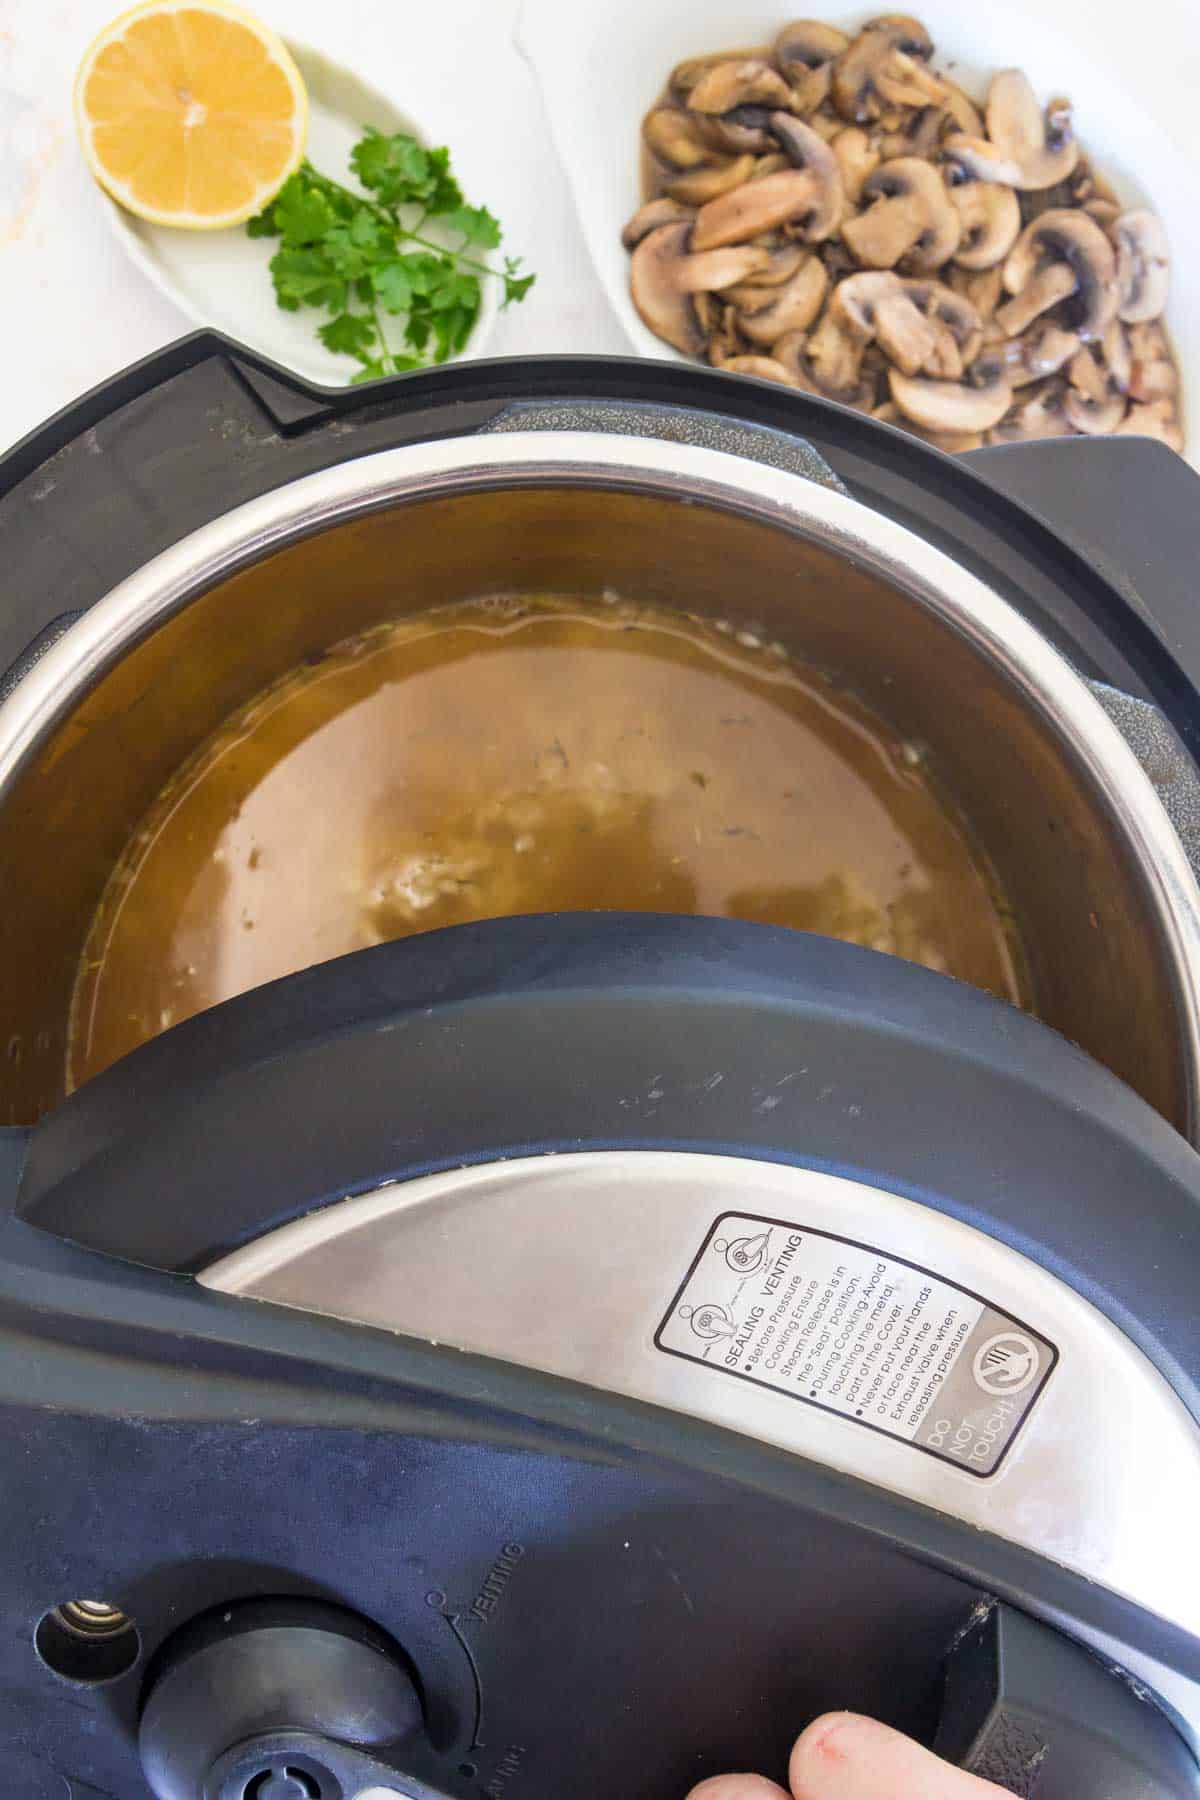 A lid is placed over the Instant Pot filled with risotto ingredients.